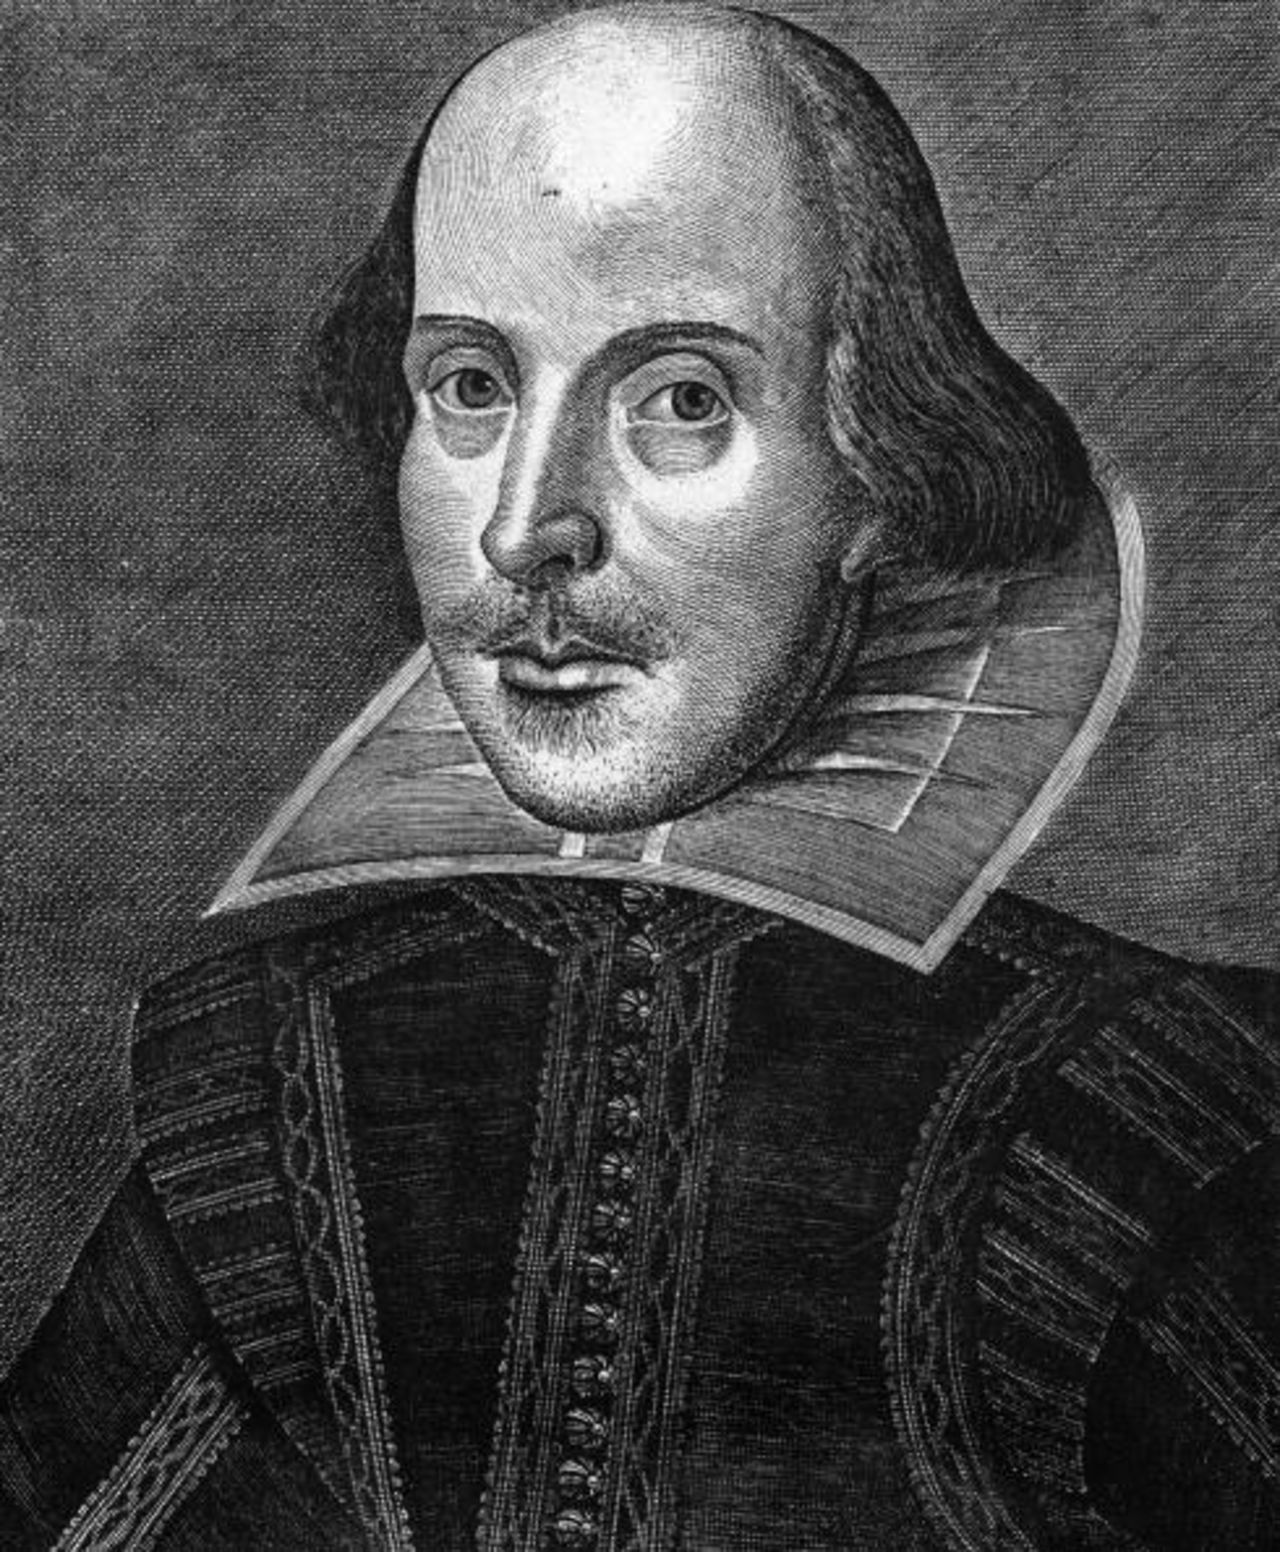 The best-known picture of Shakespeare is this one, from the First Folio, published in 1623. Shakespeare died in 1616; it will be 400 years since his death next year.